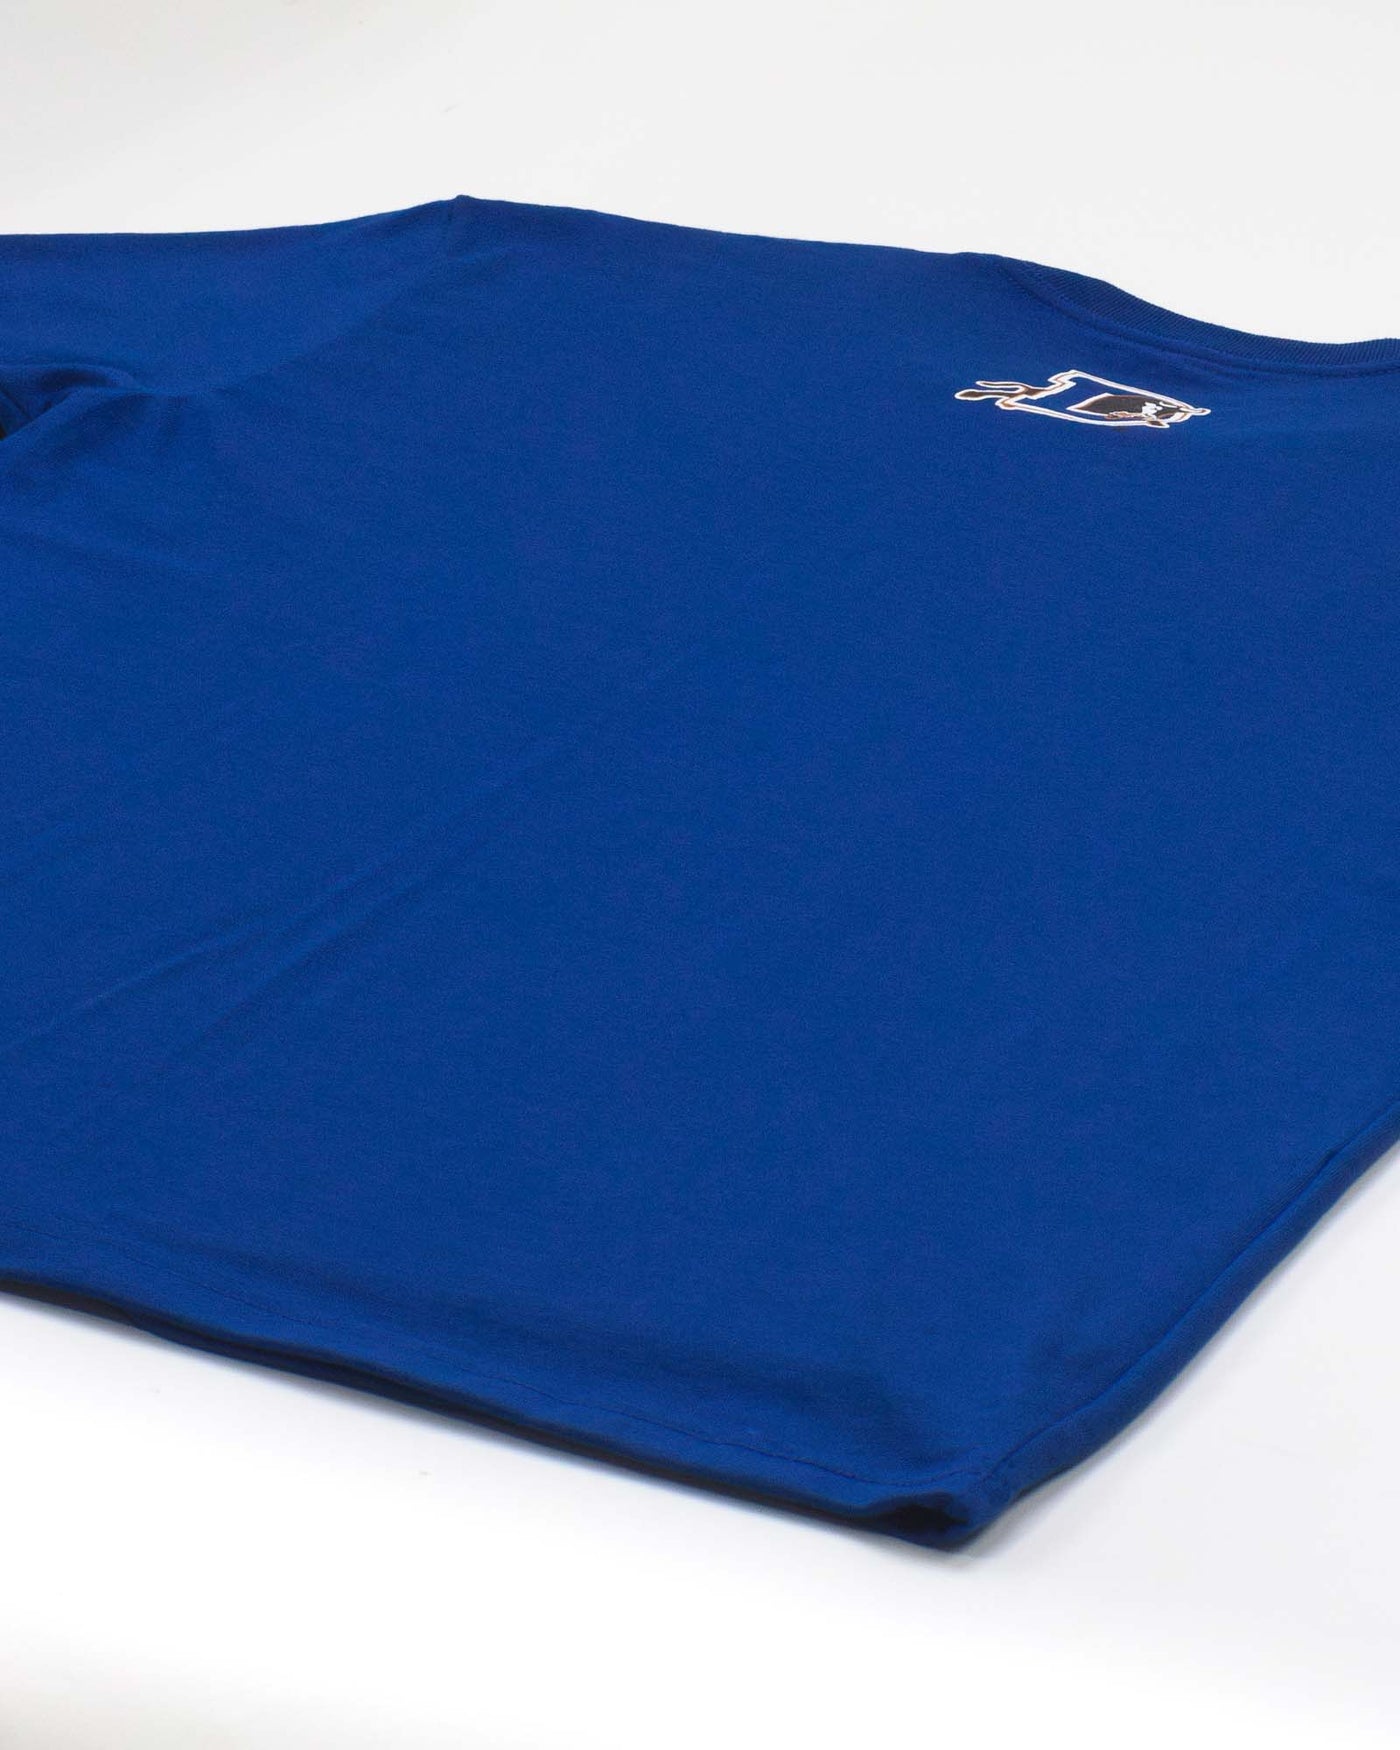 Outfield Fence Tee - Durham Bulls